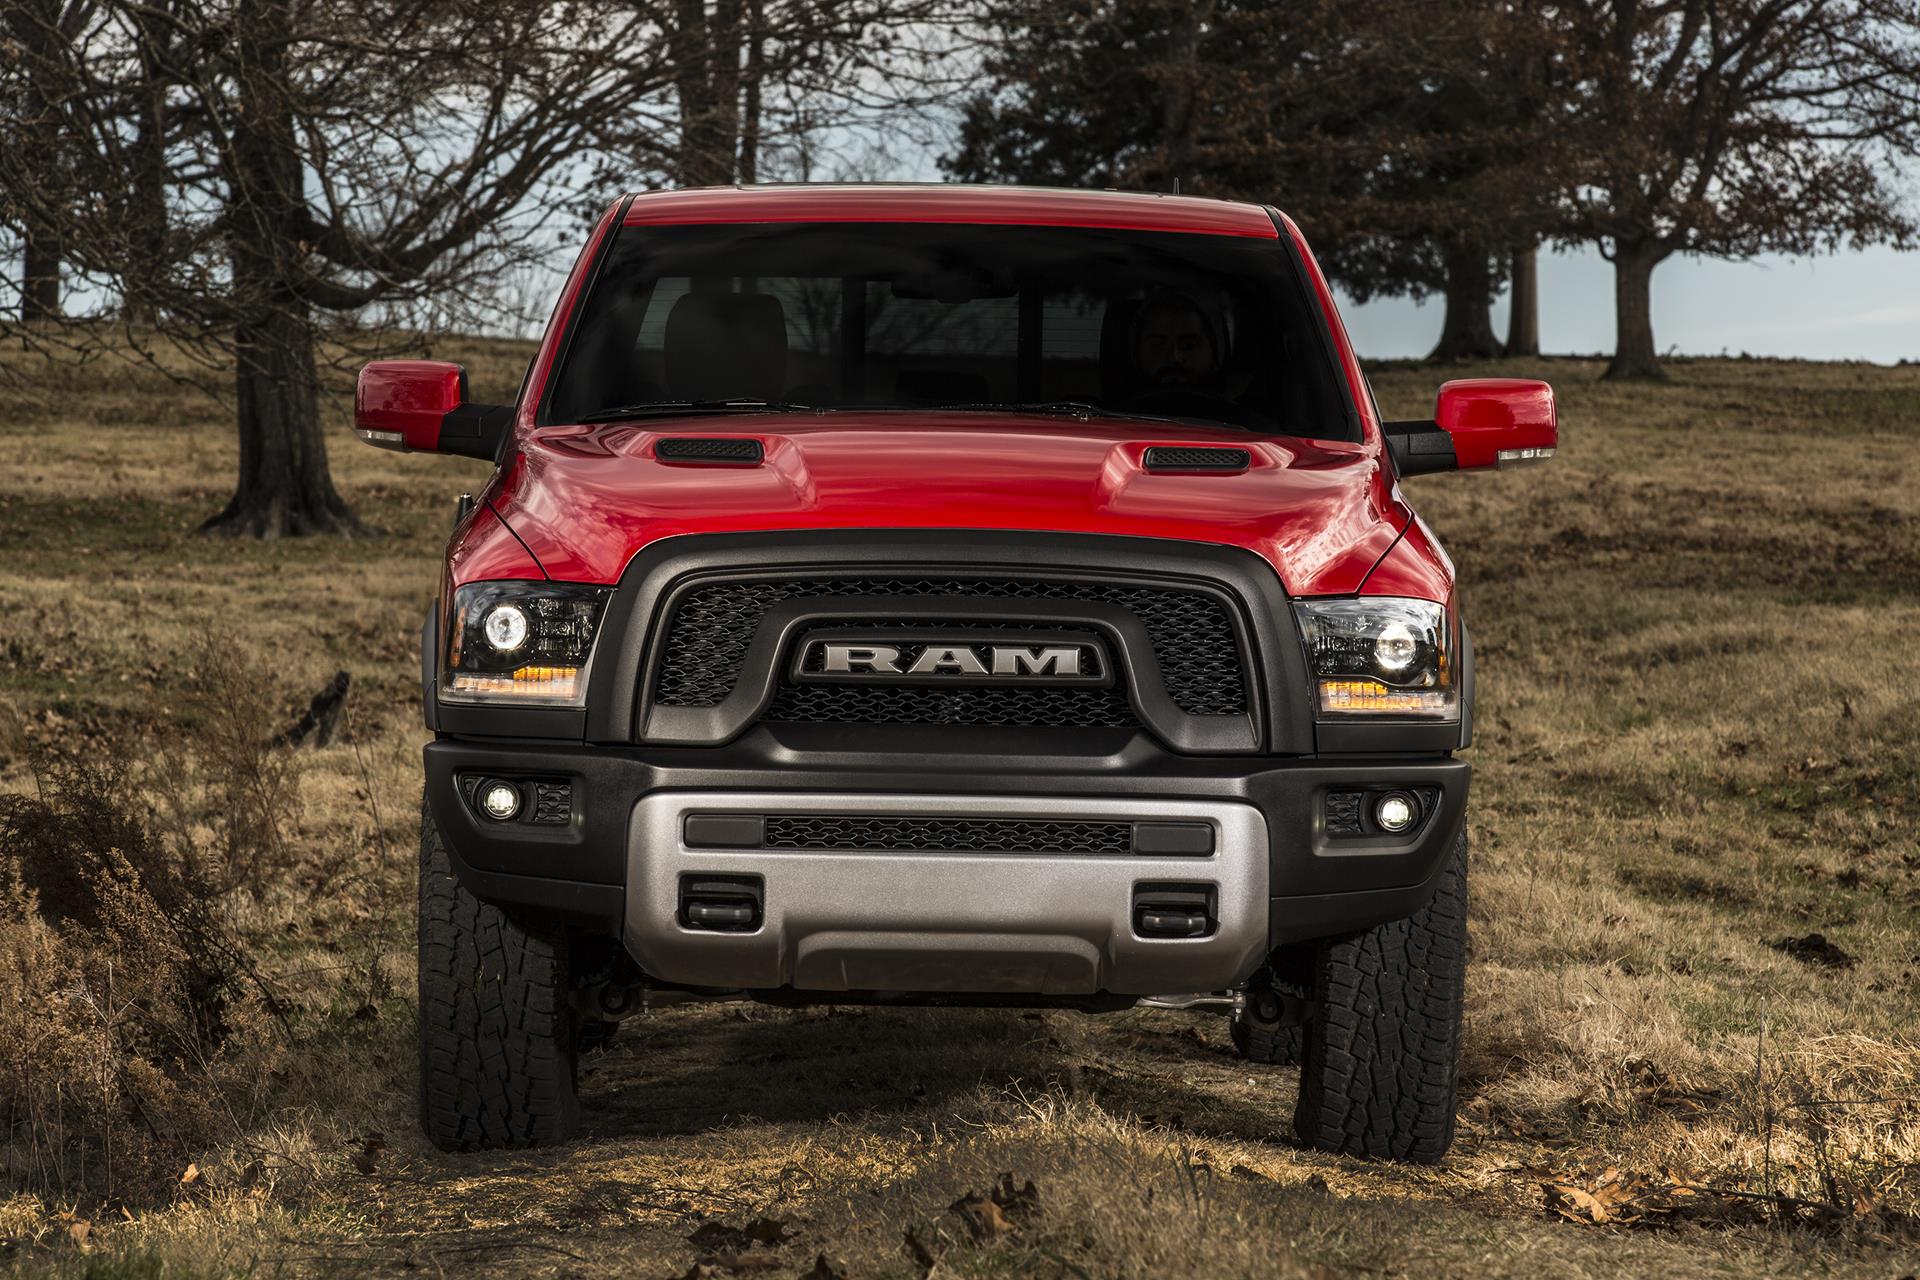 Ram Rebel Technical Specifications And Data Engine Dimensions